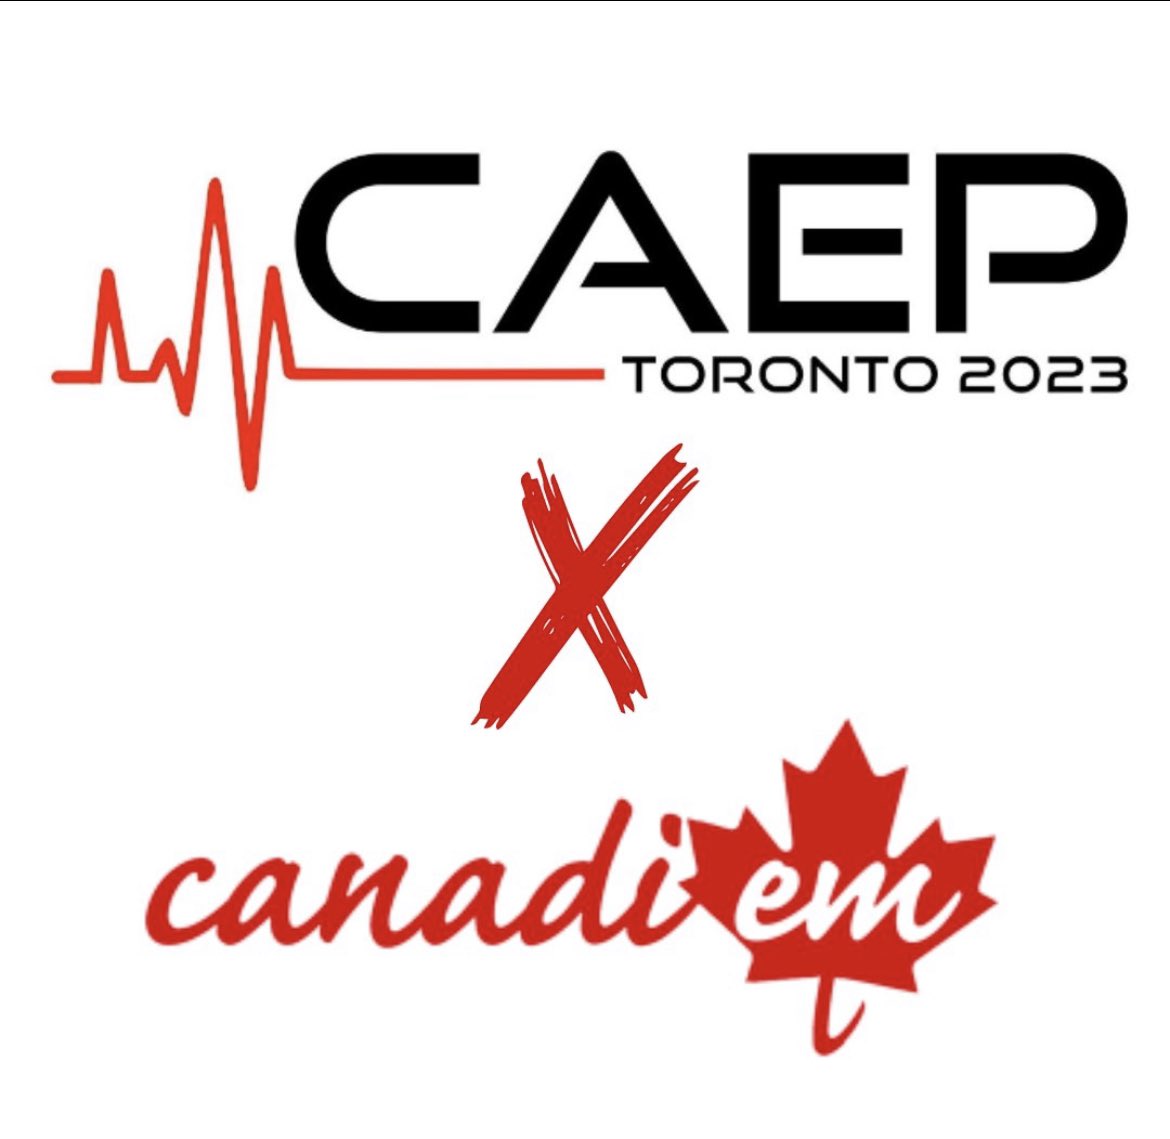 Big thanks to @CanadiEM @WeAreCanadiEM for their outstanding contributions in social media during #CAEP23! Your insights and expertise are invaluable in advancing emergency medicine education social media platforms!